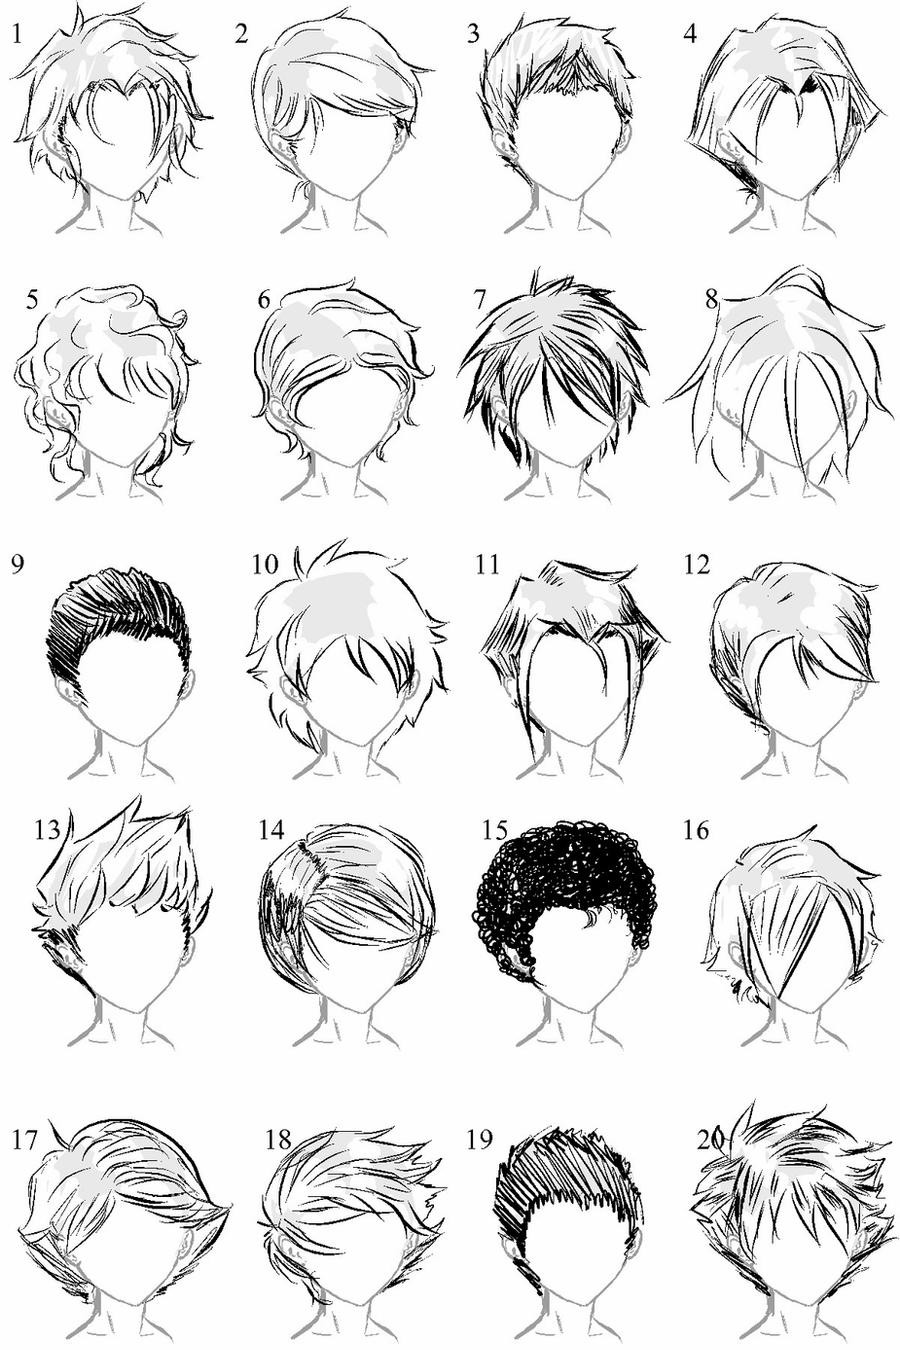 Male Hairstyle Drawing
 20 More Male Hairstyles by LazyCatSleepsDaily on DeviantArt